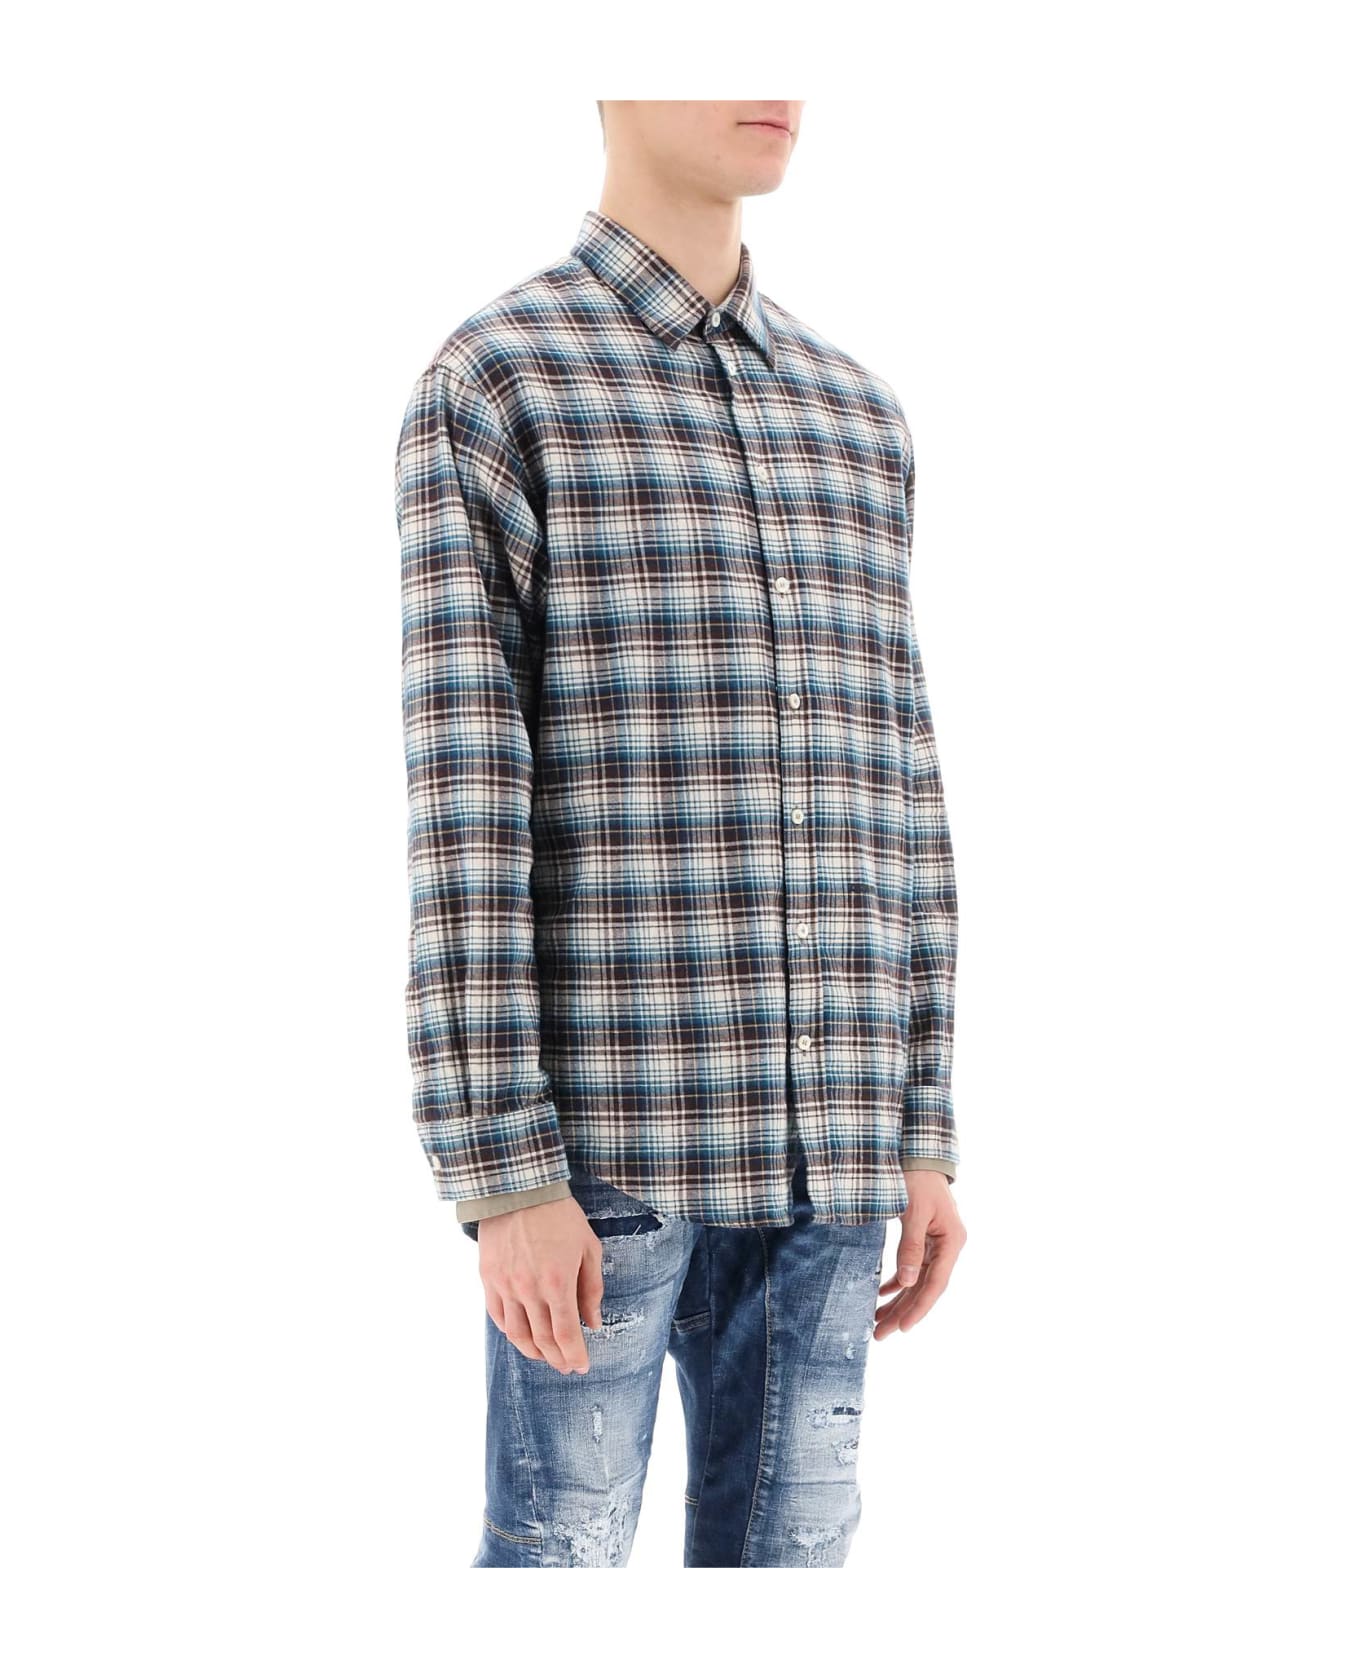 Dsquared2 Check Shirt With Layered Sleeves - IVORY BROWN GREEN (Blue)